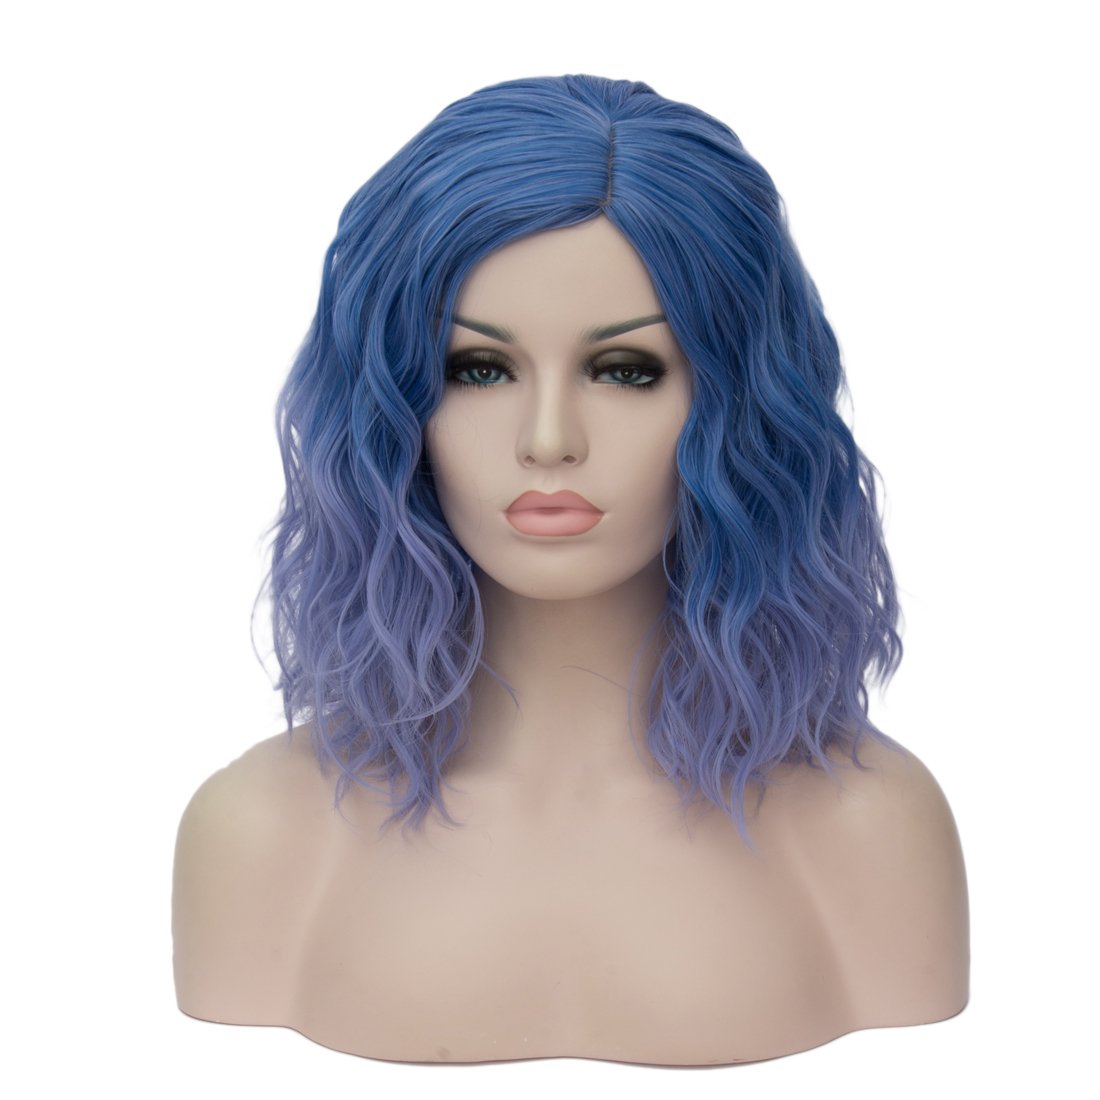 ombre blue wig HAIR Synthetic Curly Bob Wig with Bangs Short Bob Wavy Hair Wigs Wine Red Color Wigs for Women Bob Style Synthetic Heat Resistant Bob Wigs.